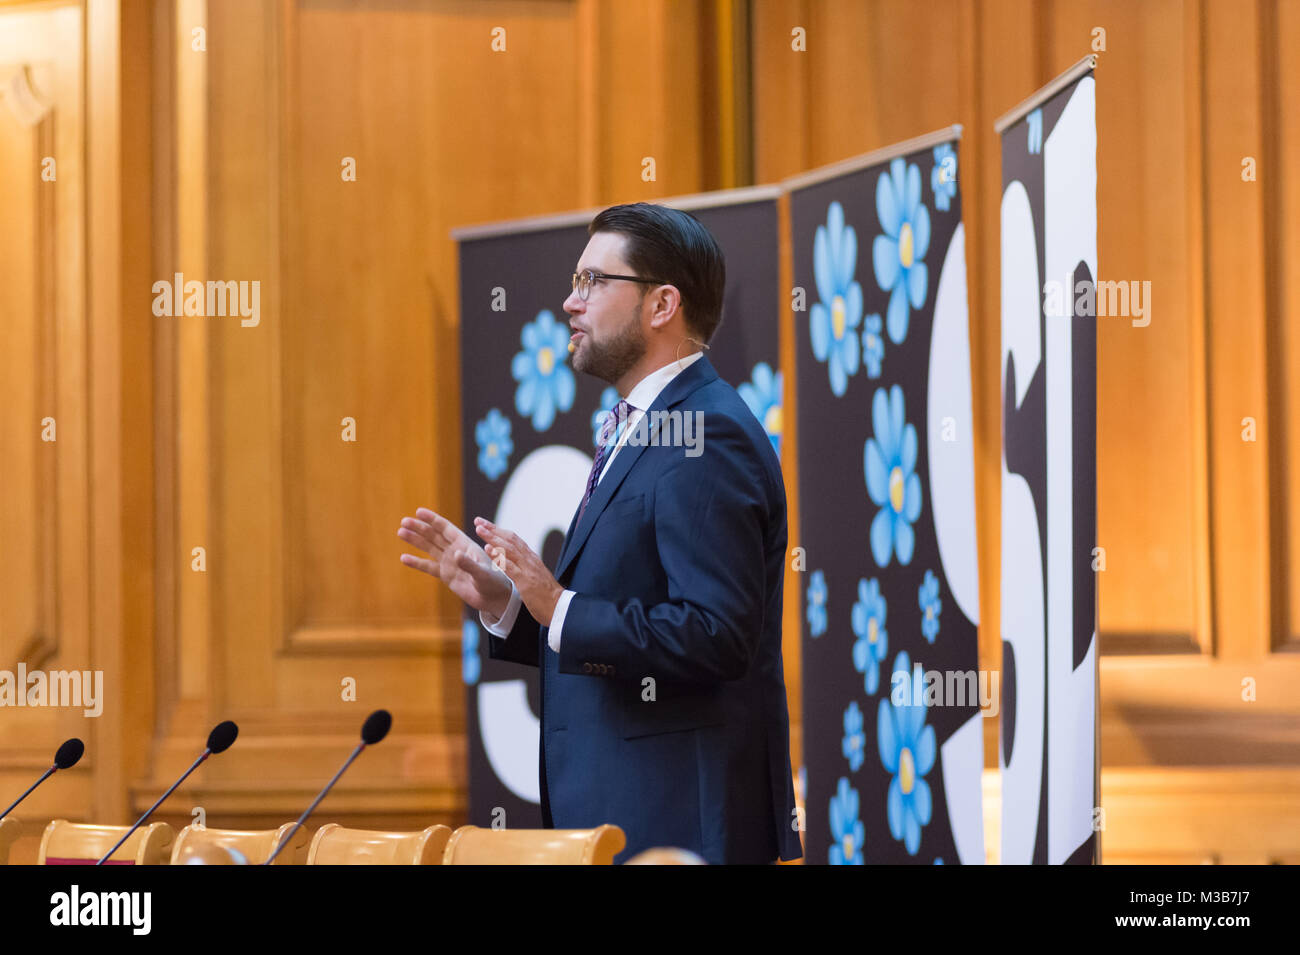 Stockholm, Sweden, 10th February, 2018. 'Future Conference' Sweden Democrats (SD) (Sverigedemokraterna) at the House of Parliament, Stockholm. Party leader Jimmie Åkesson (SD) speech on politics 2018 - 2022 and about his visions for the party's future development. Stock Photo